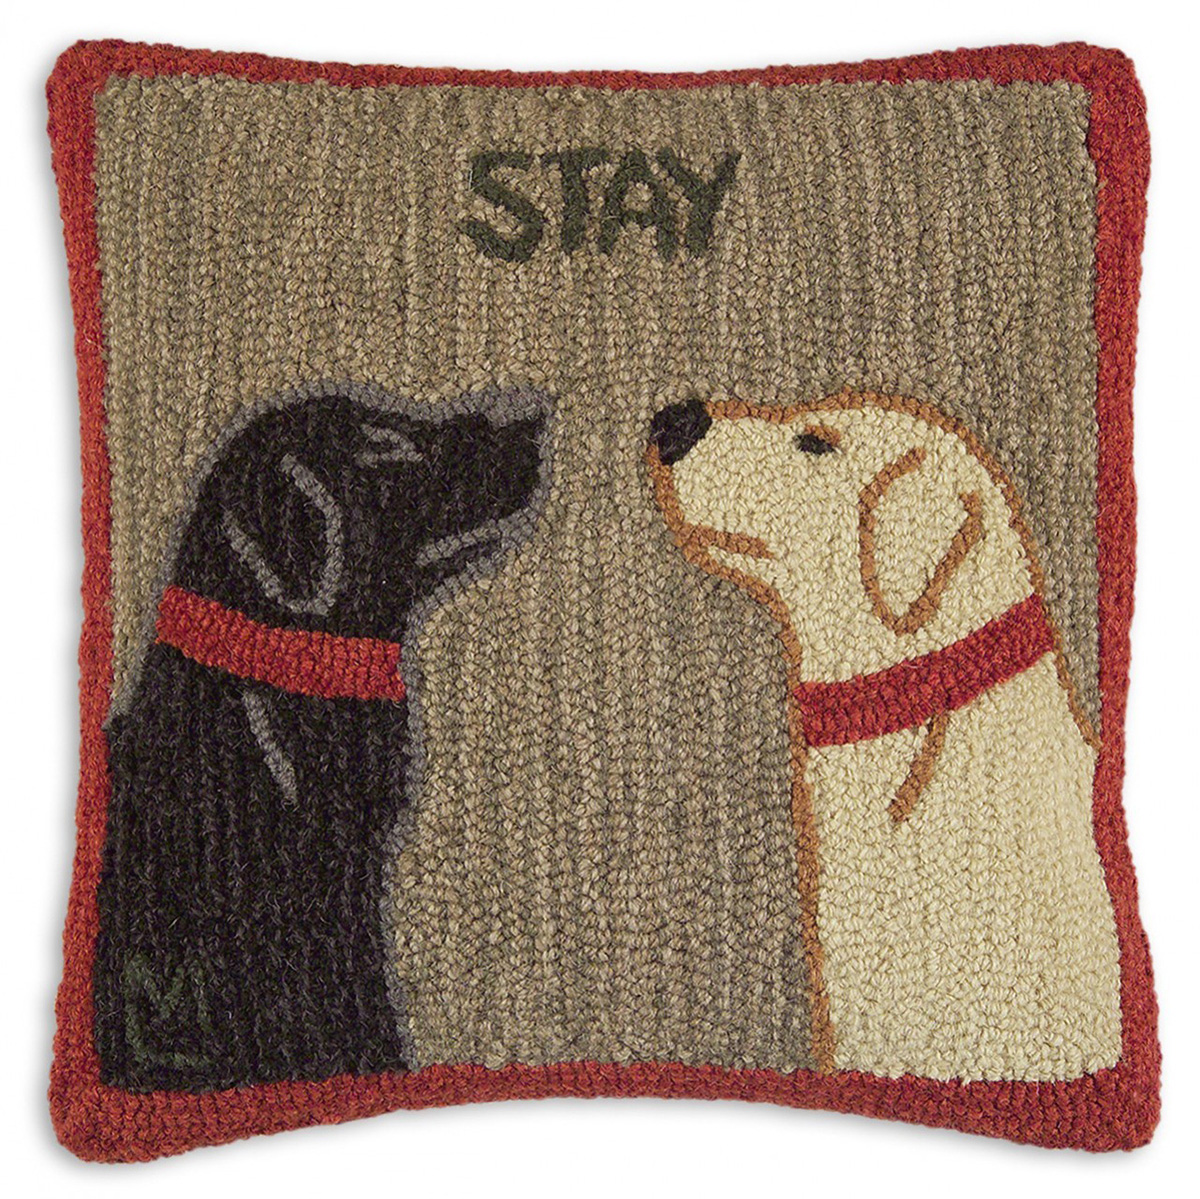 Chandler 4 Corners "Stay"  18" Pillow